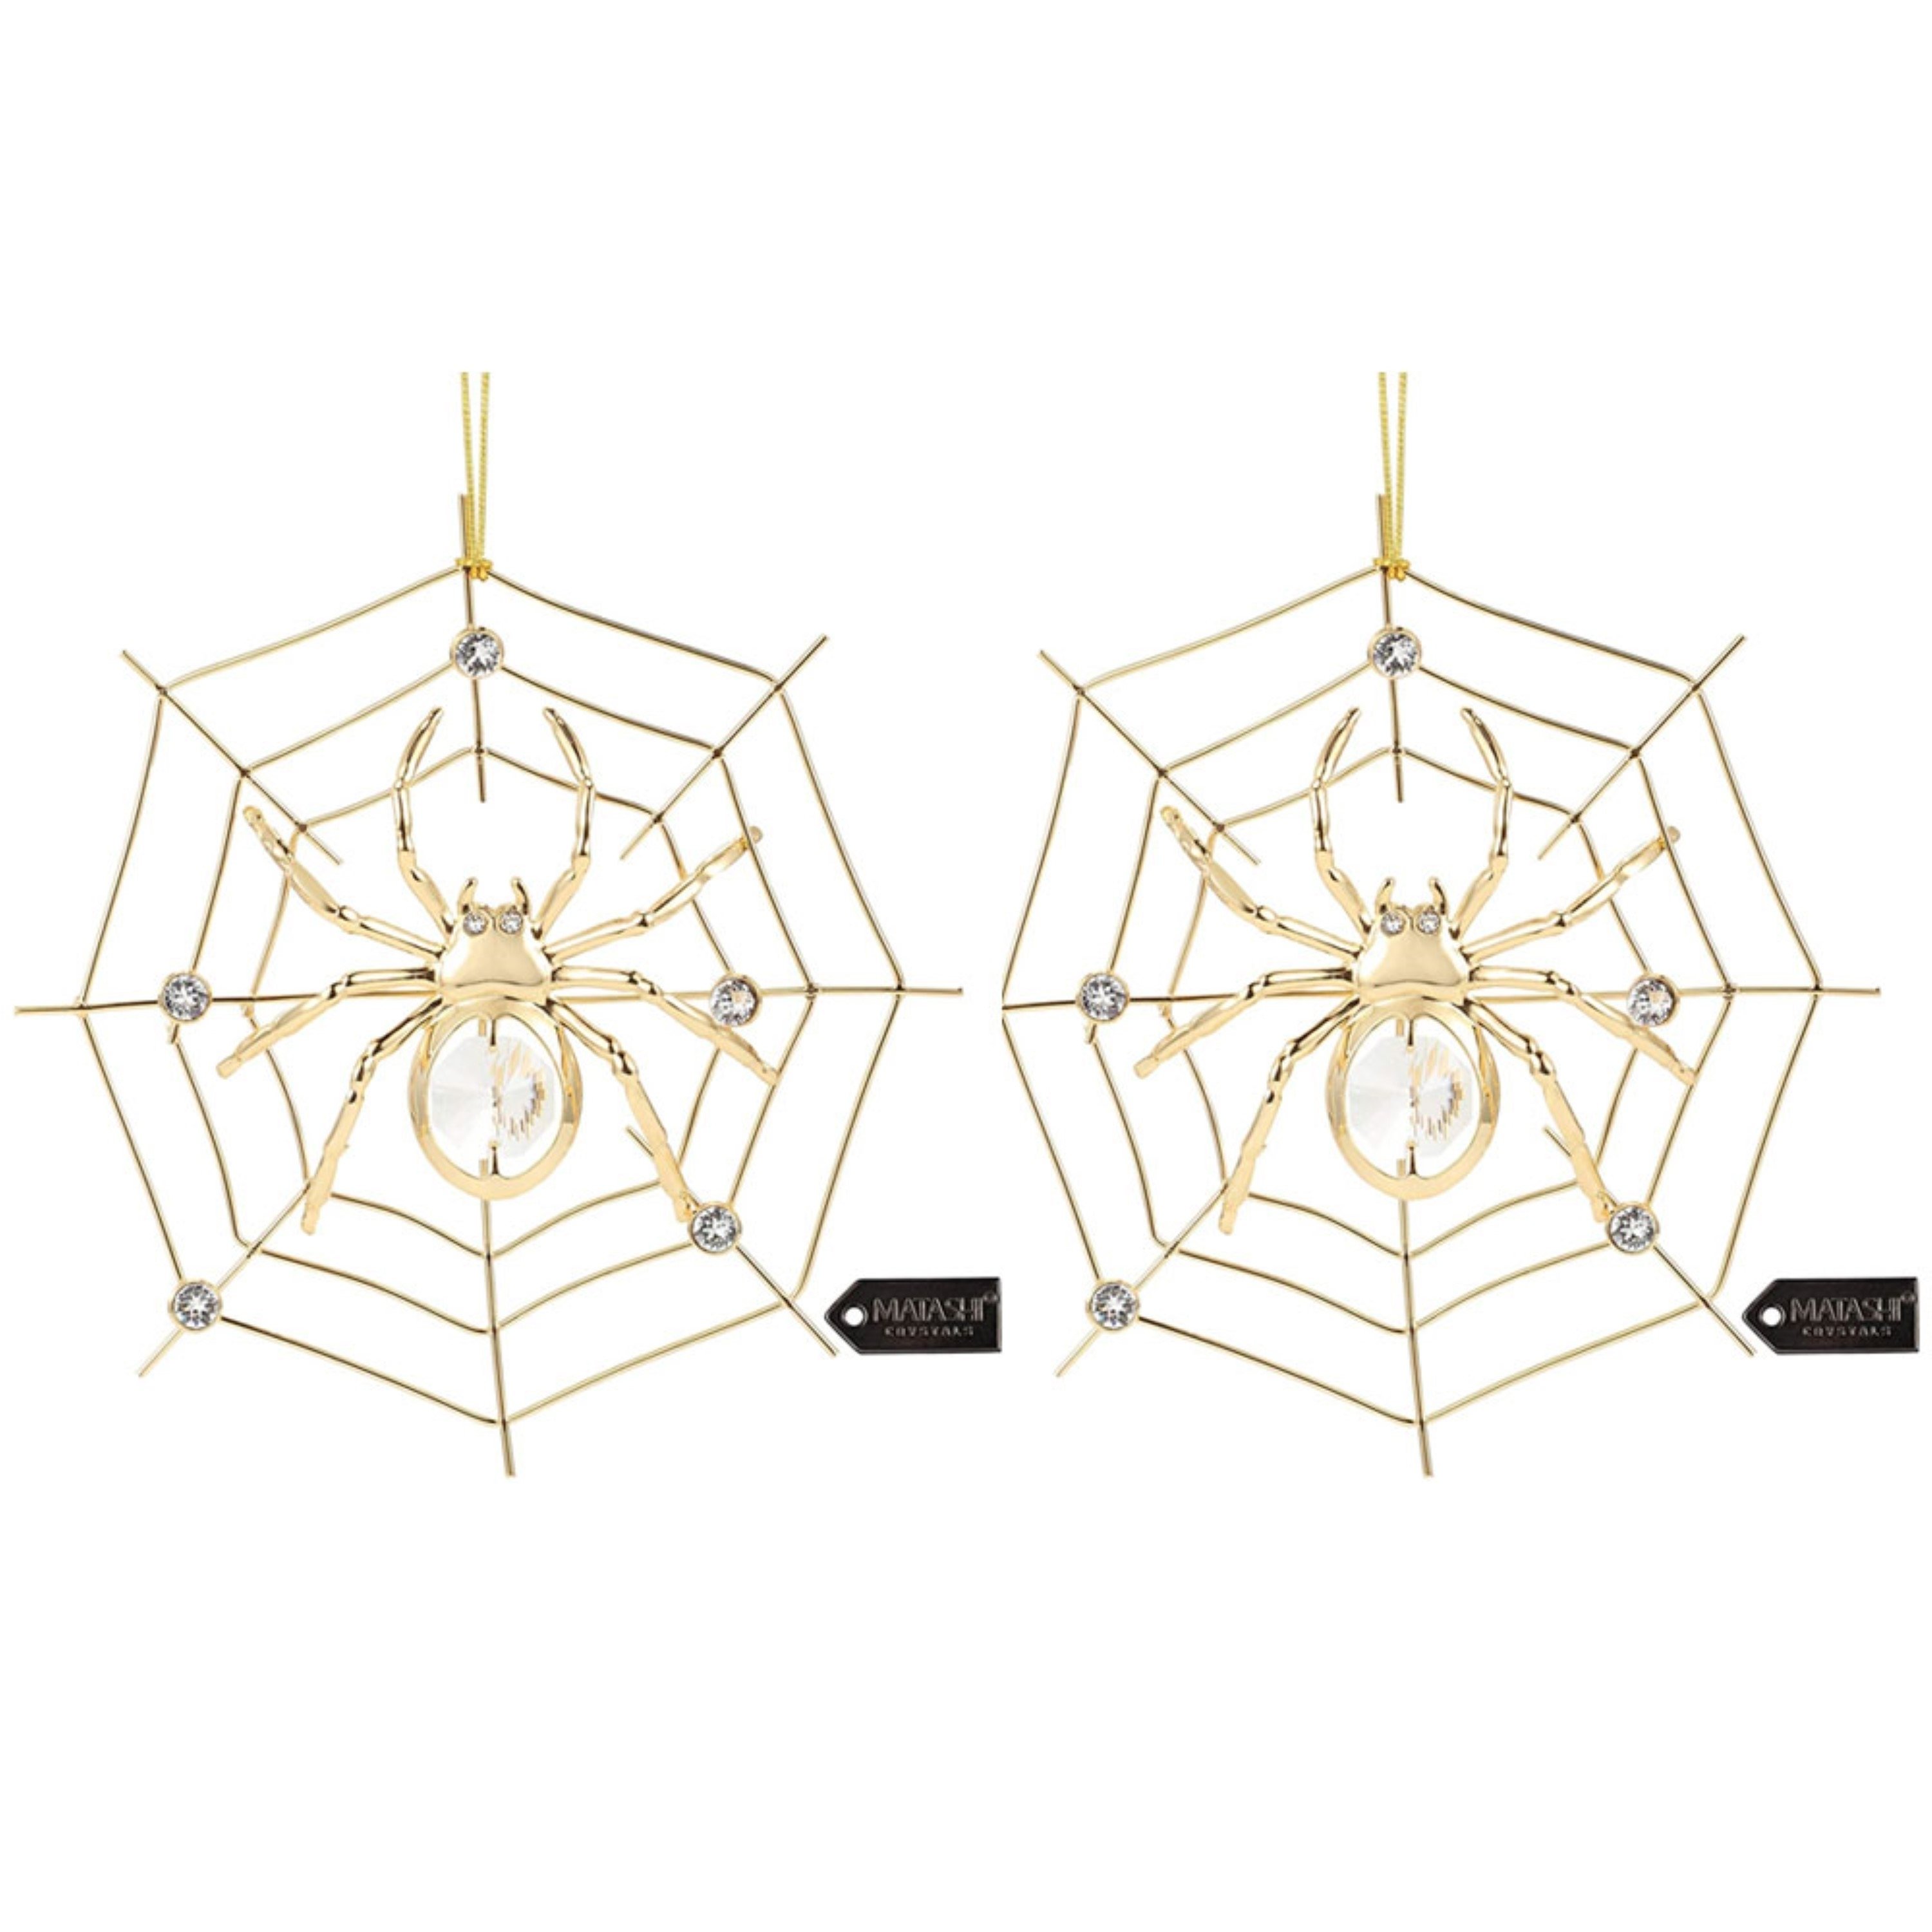 (2 Set) Matashi 24K Gold Plated Crystal Studded Lucky Spider Hanging Ornaments For Christmas Tree Spider Gift For Christams Holiday Decor